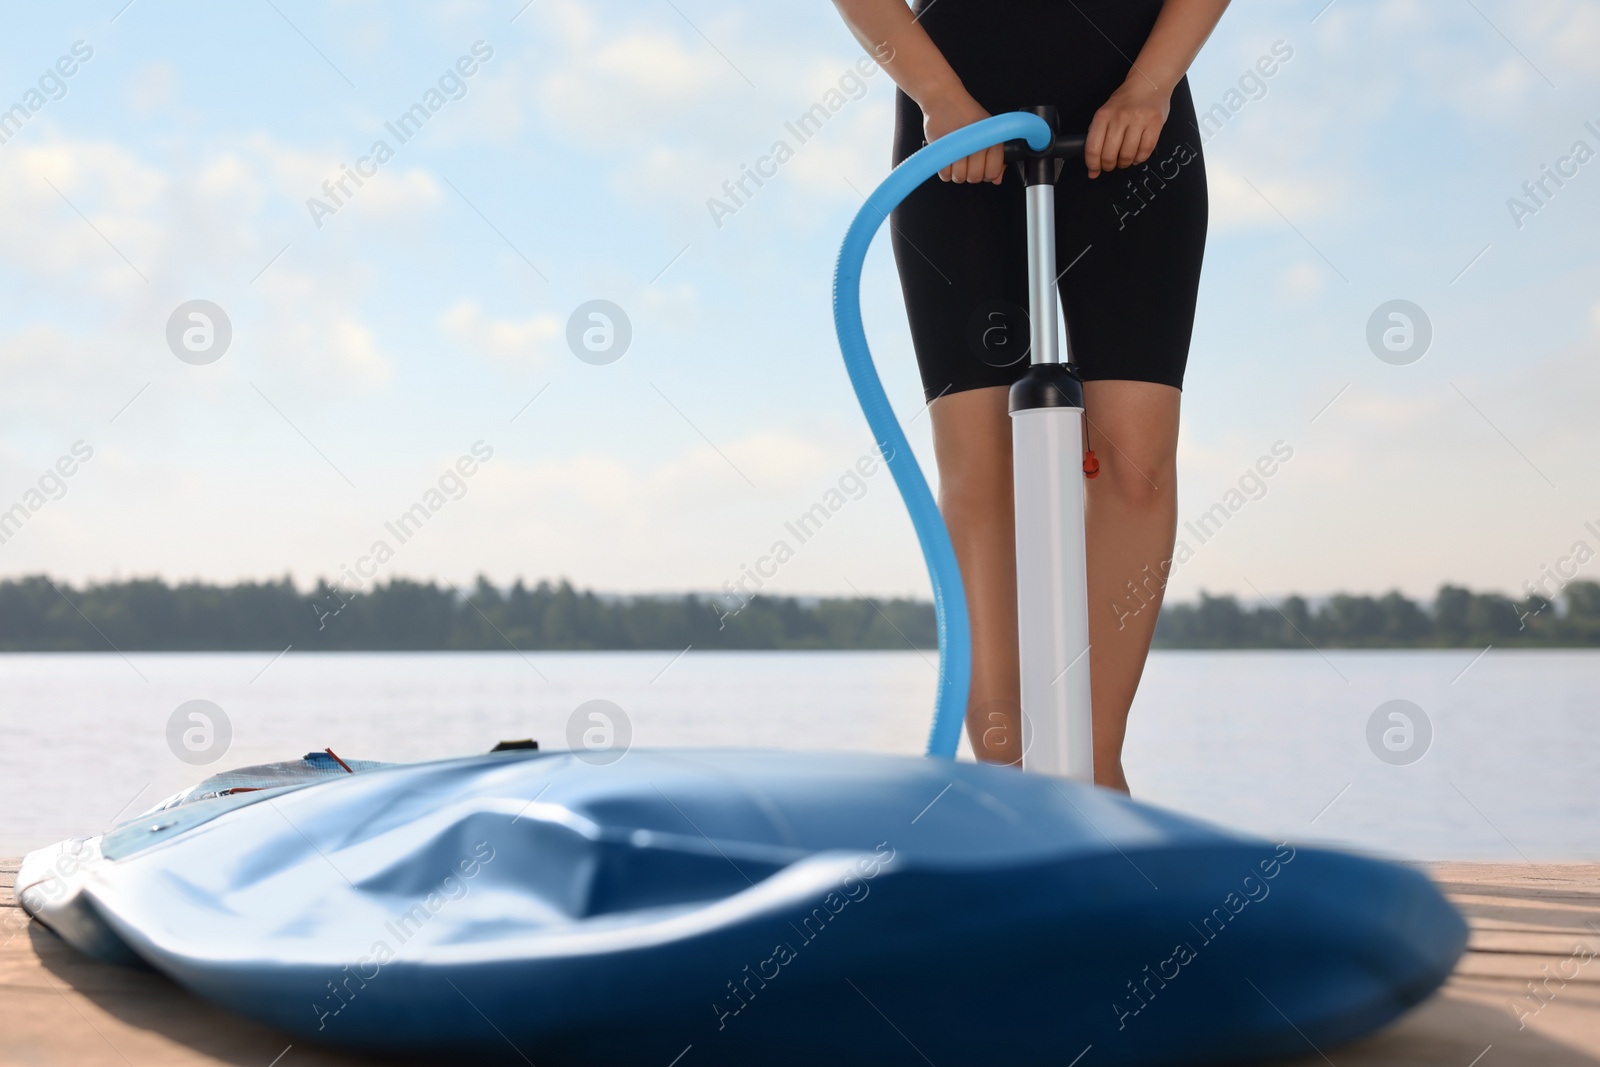 Photo of Woman pumping up SUP board on pier, closeup